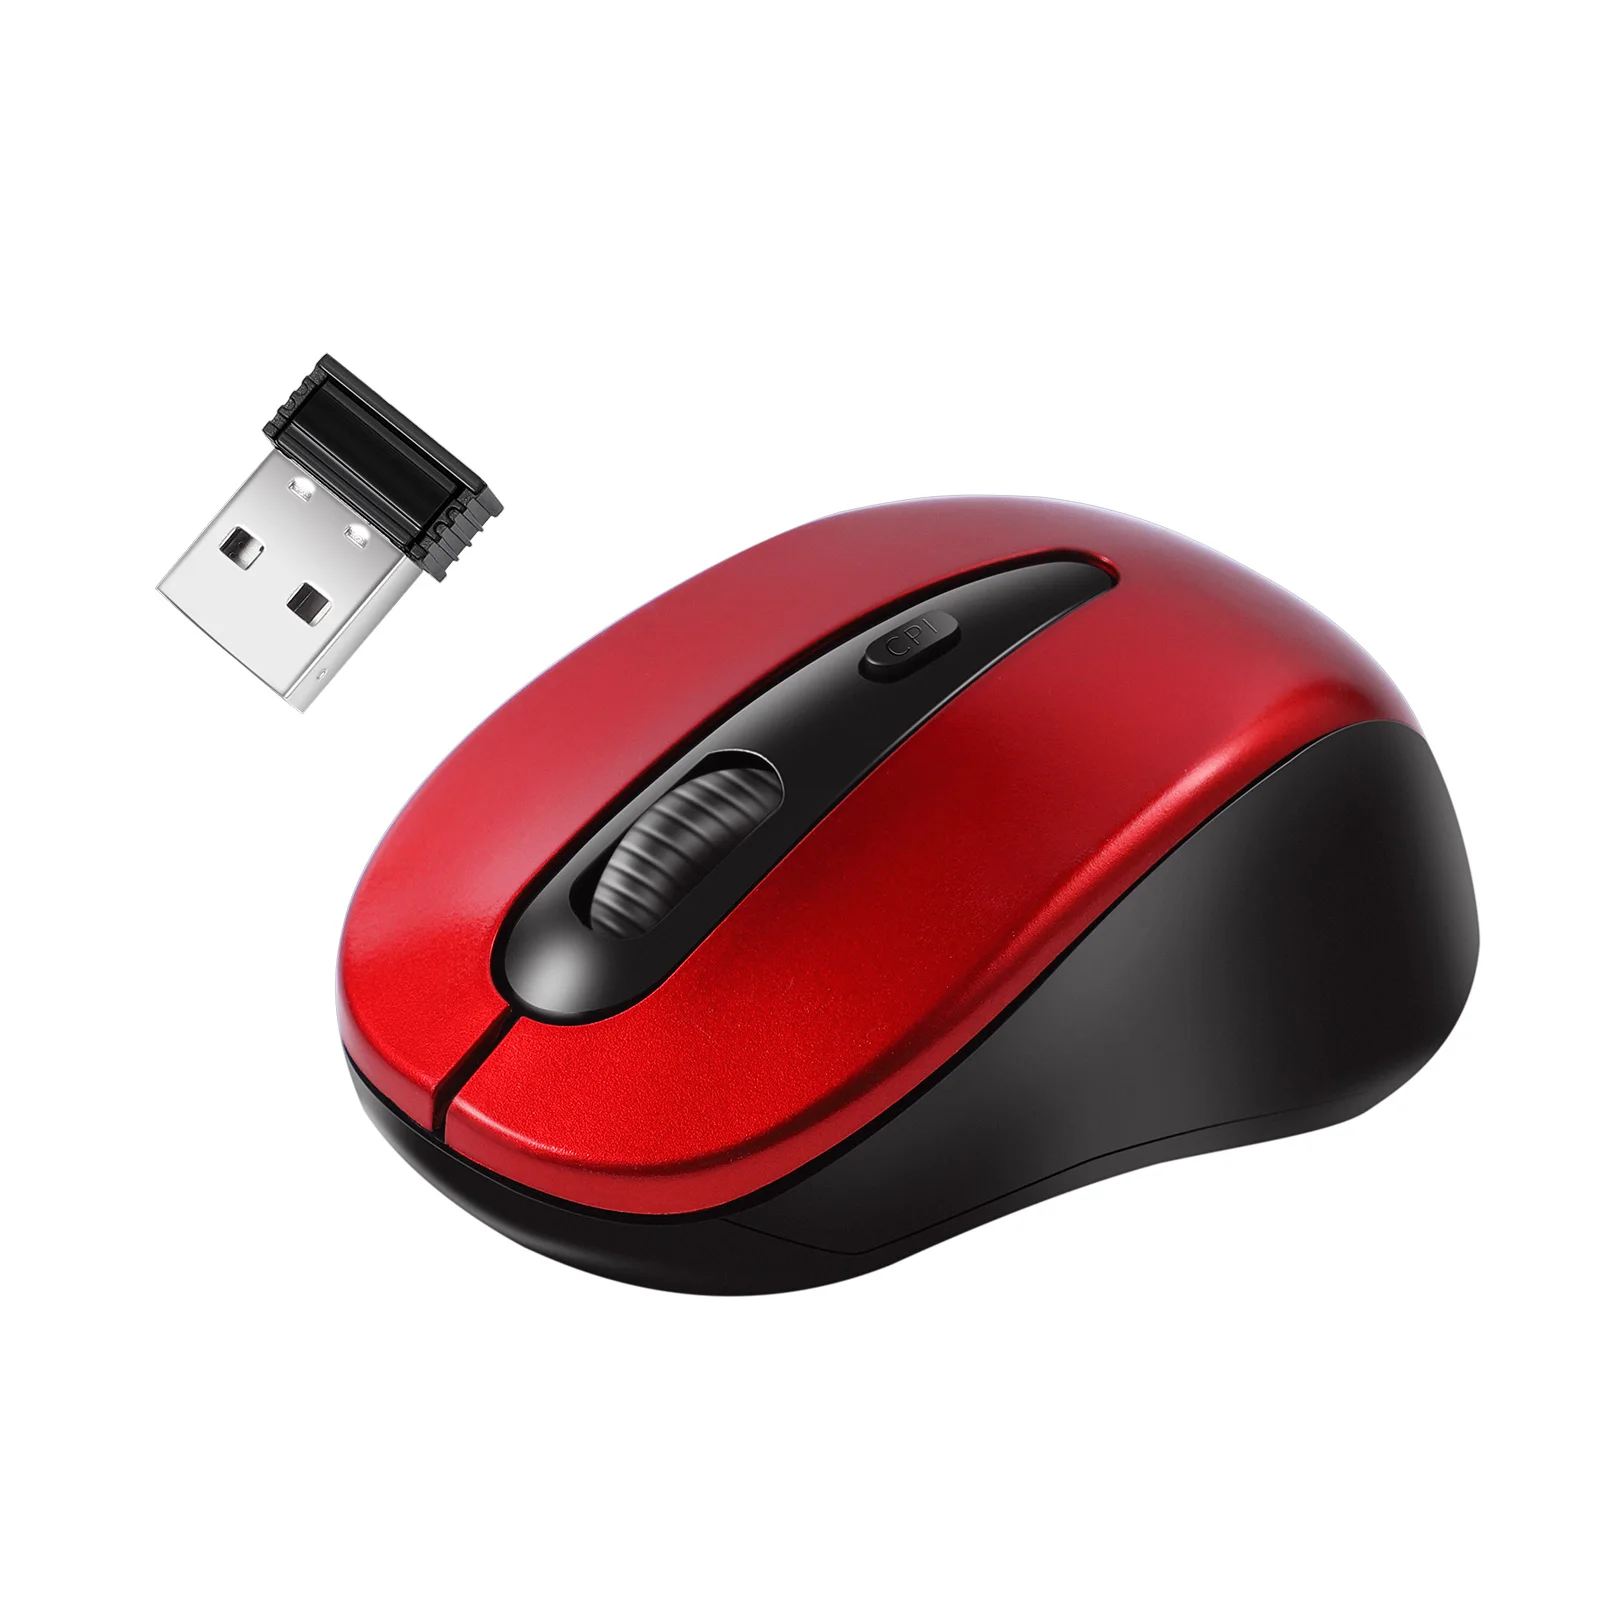 

Universal 2.4GHz Wireless Mouse 1600DPI Optical Computer Cordless Office Mice with USB Receiver